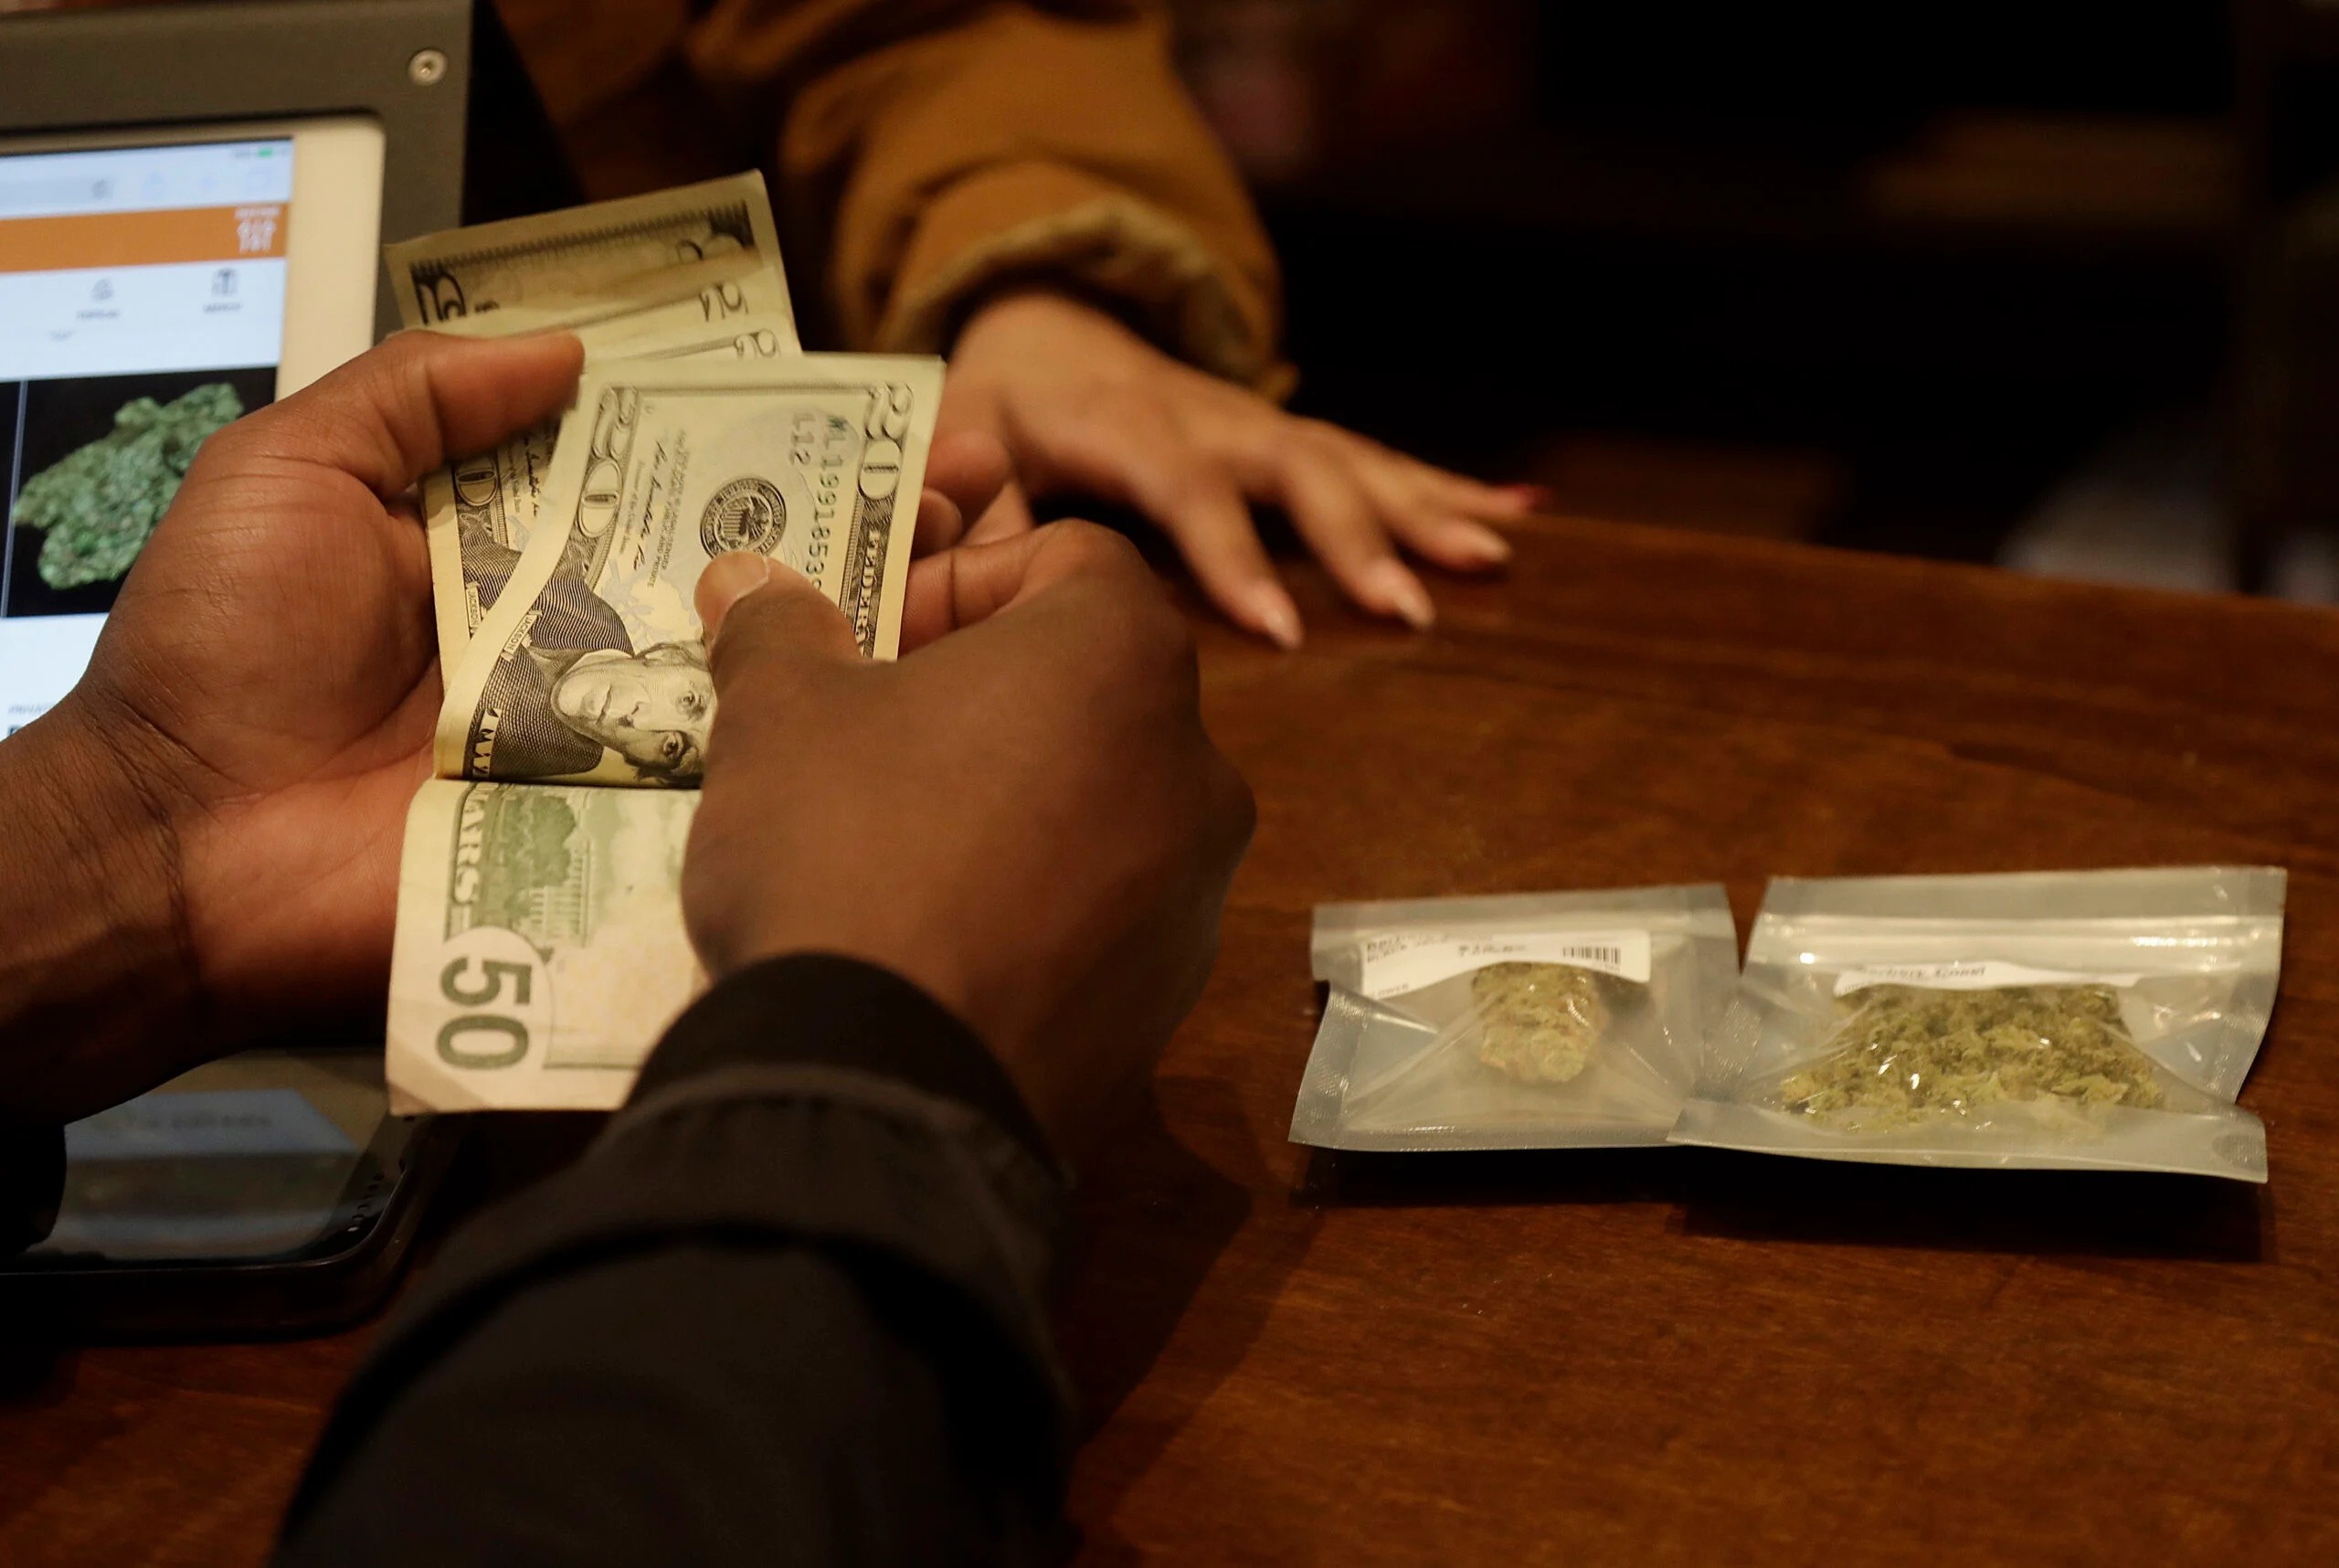 Massachusetts Legal Weed Prices Have Plummeted Below $8 a Gram